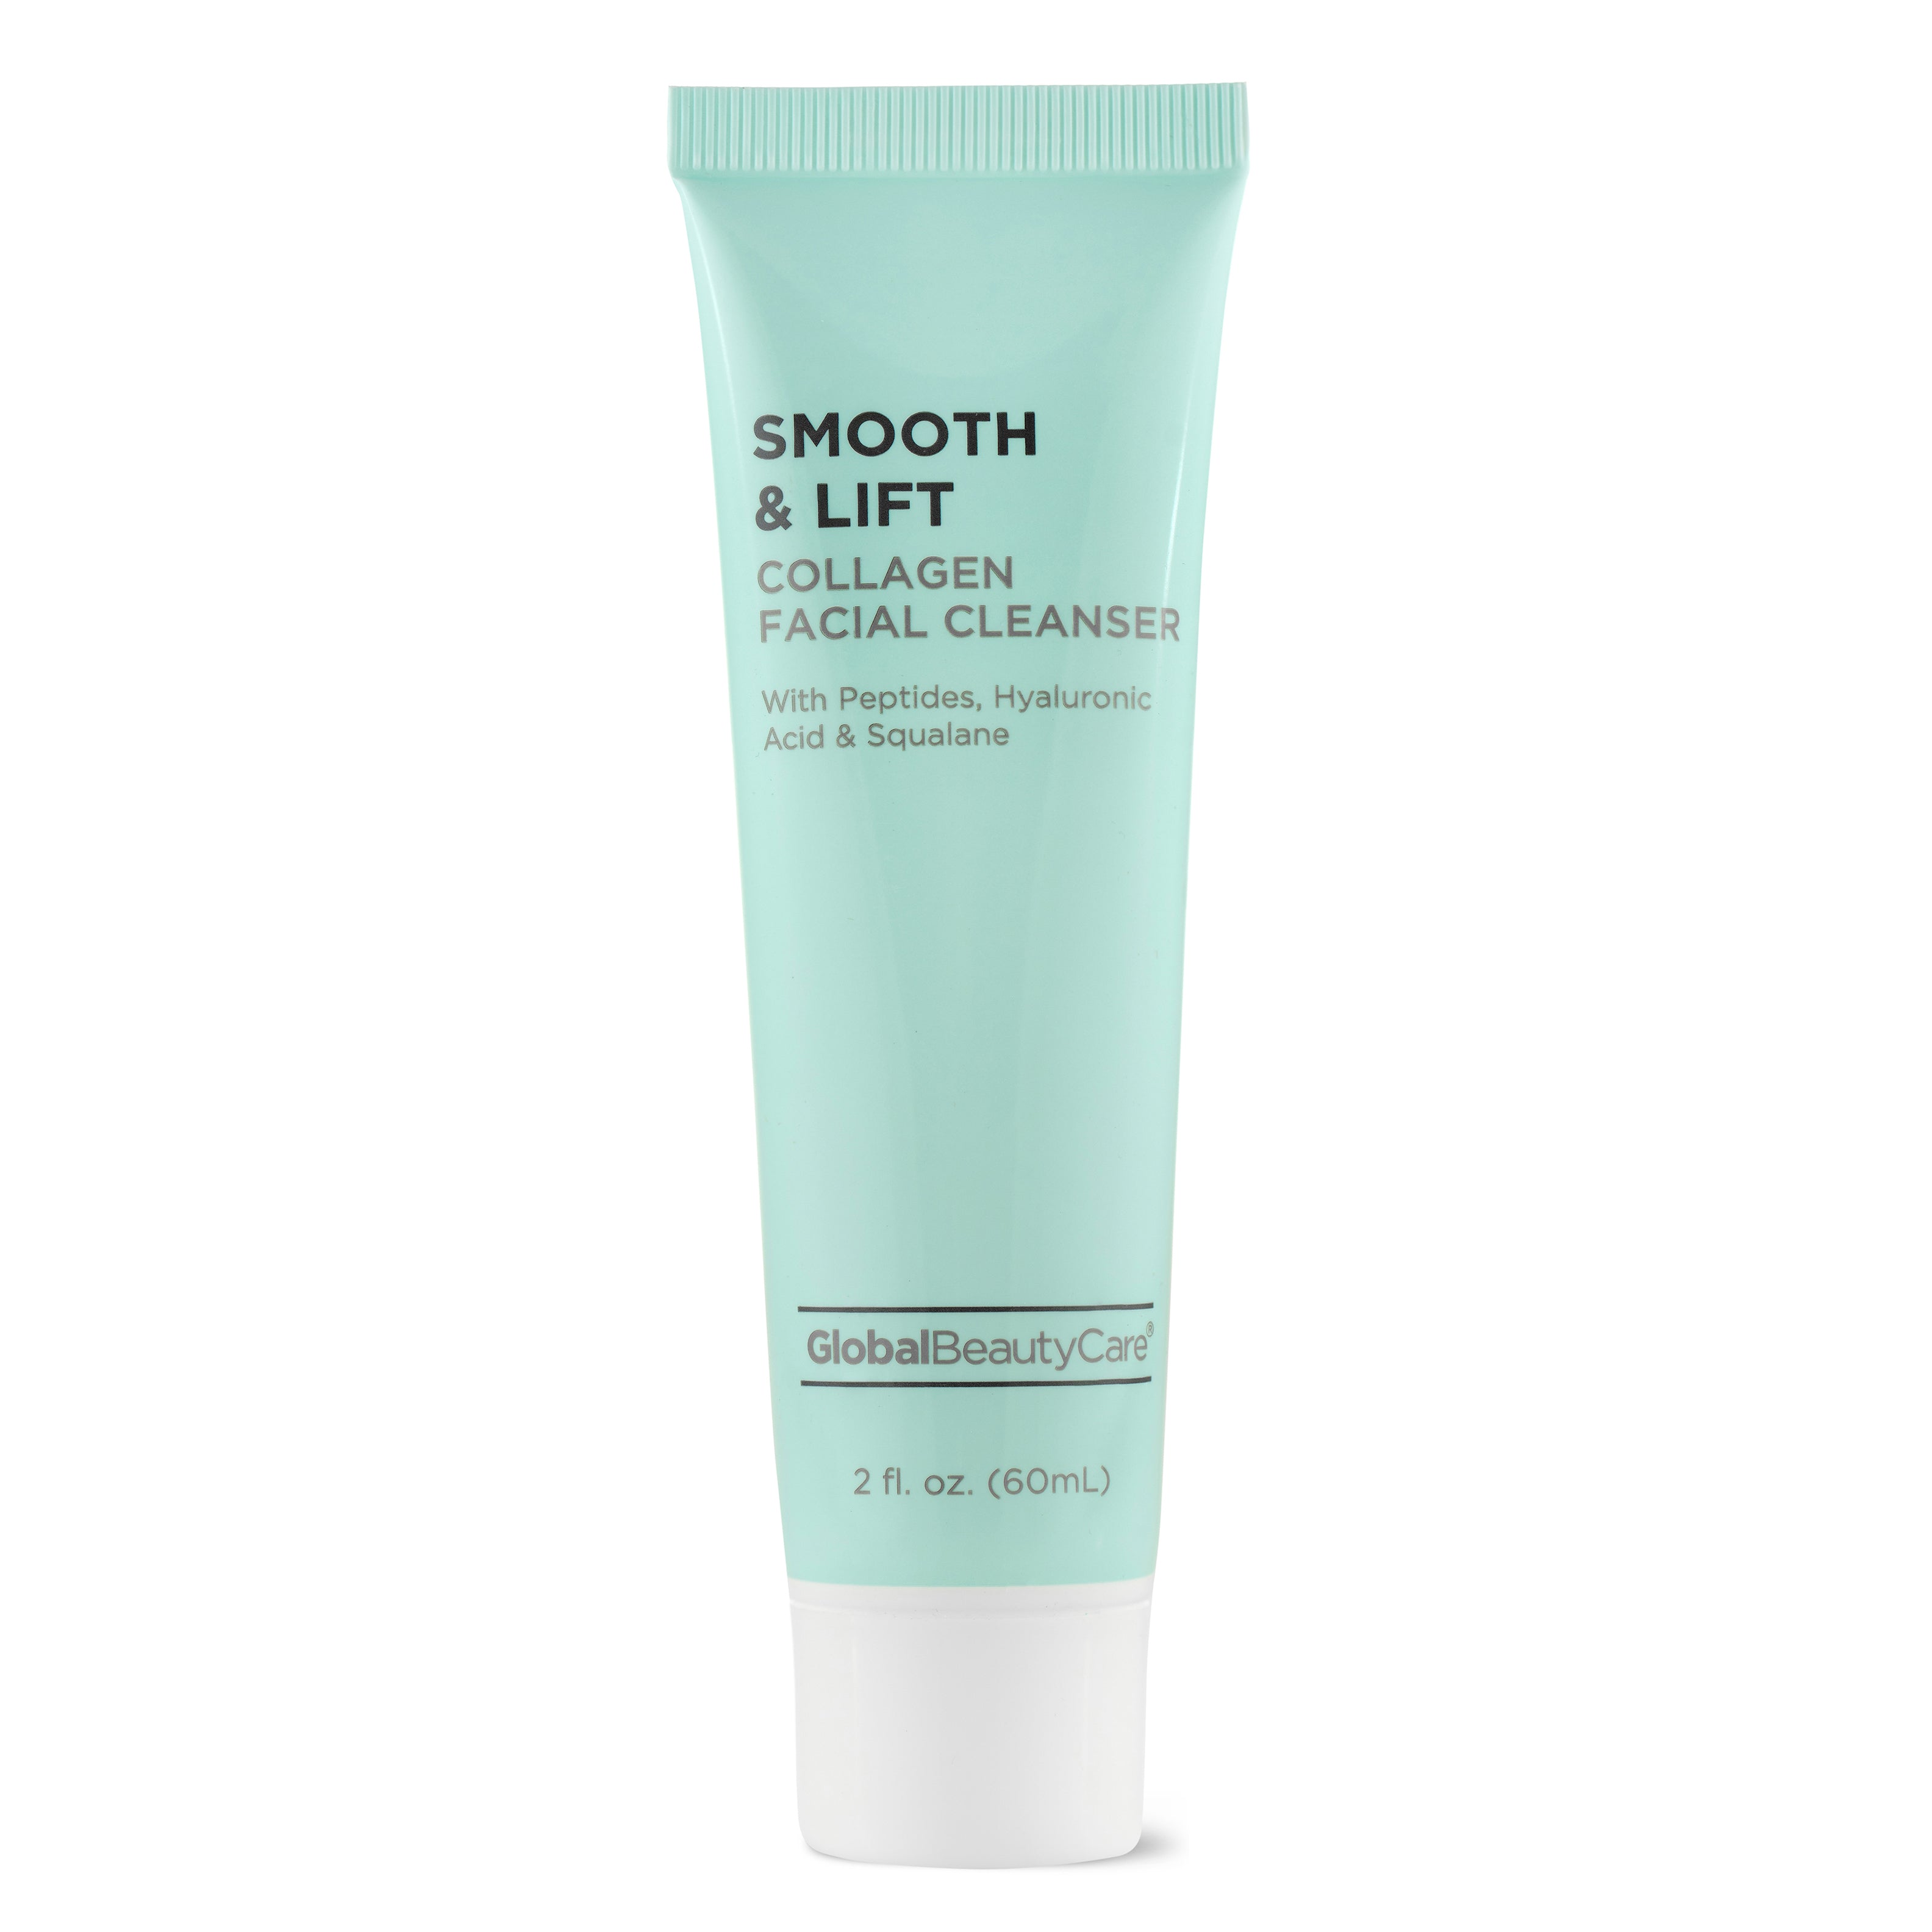 Smooth & Lift Collagen Facial Cleanser